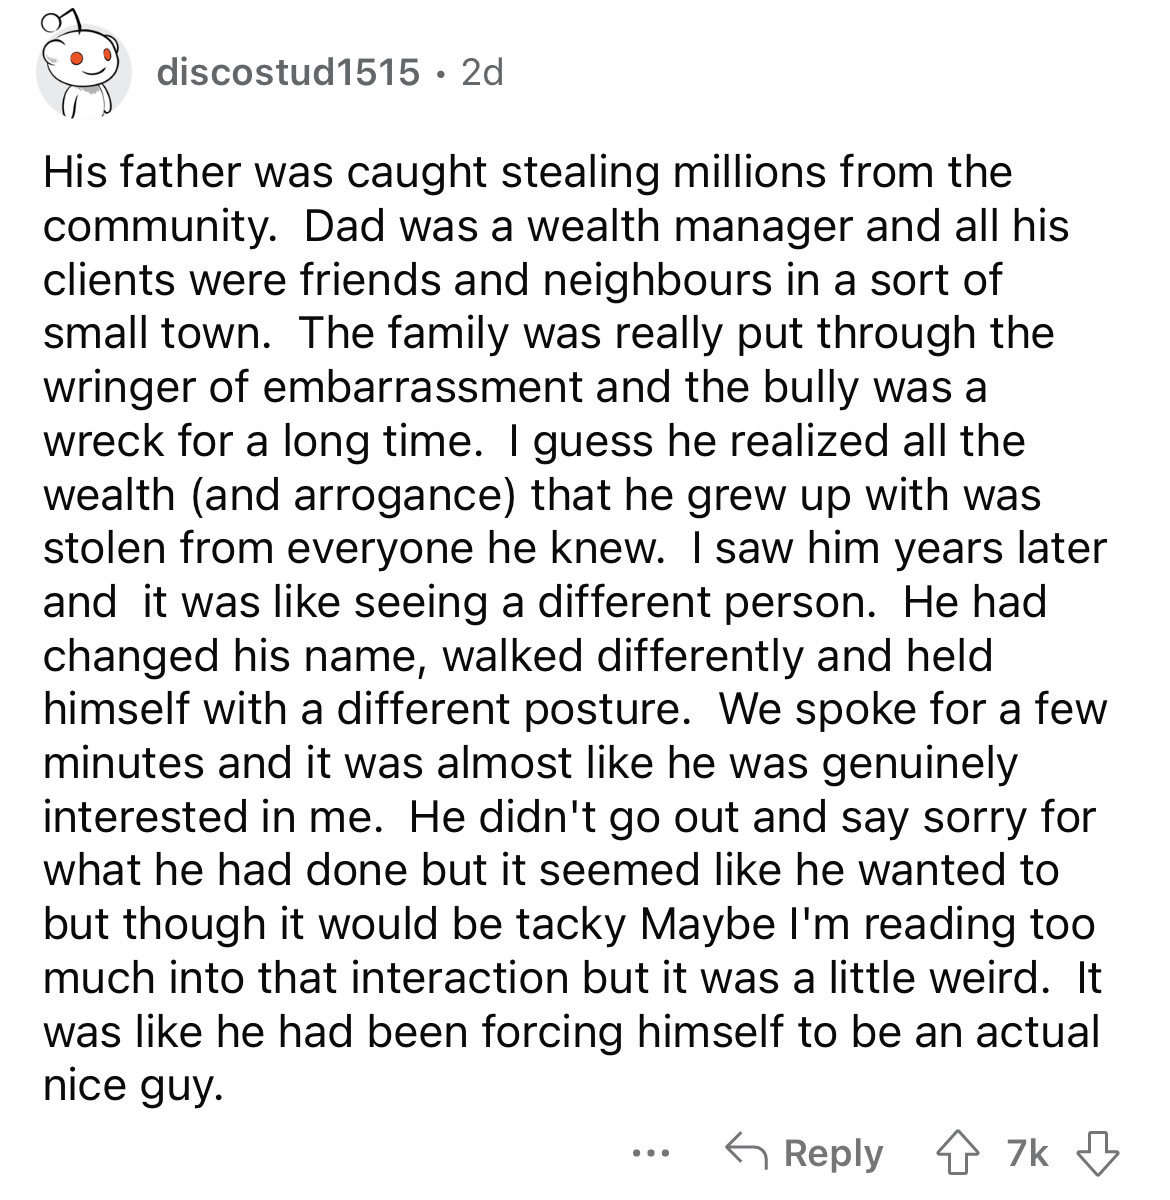 what happened to school bullies - party description - discostud1515 2d His father was caught stealing millions from the community. Dad was a wealth manager and all his clients were friends and neighbours in a sort of small town. The family was really put